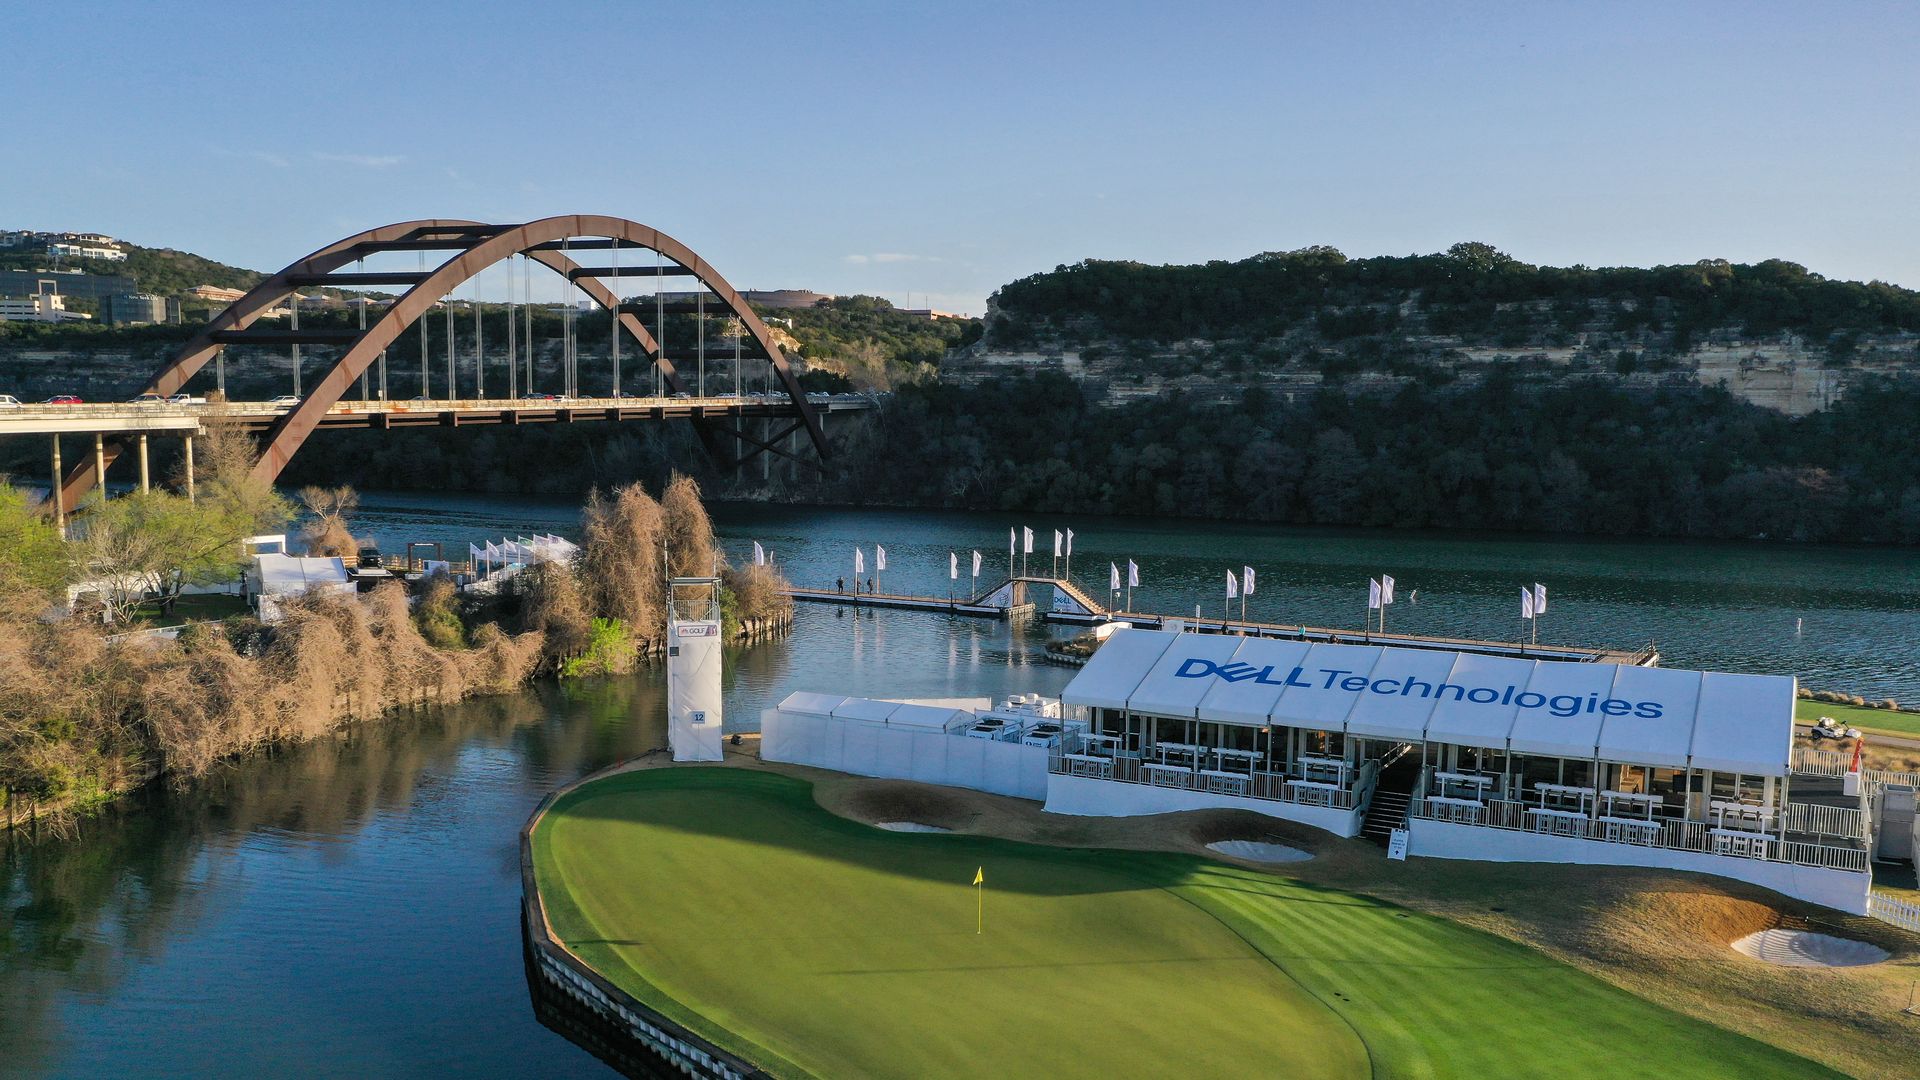 A drone photo of the 360 bridge in Austin with a tent in the foreground reading "Dell Technologies."